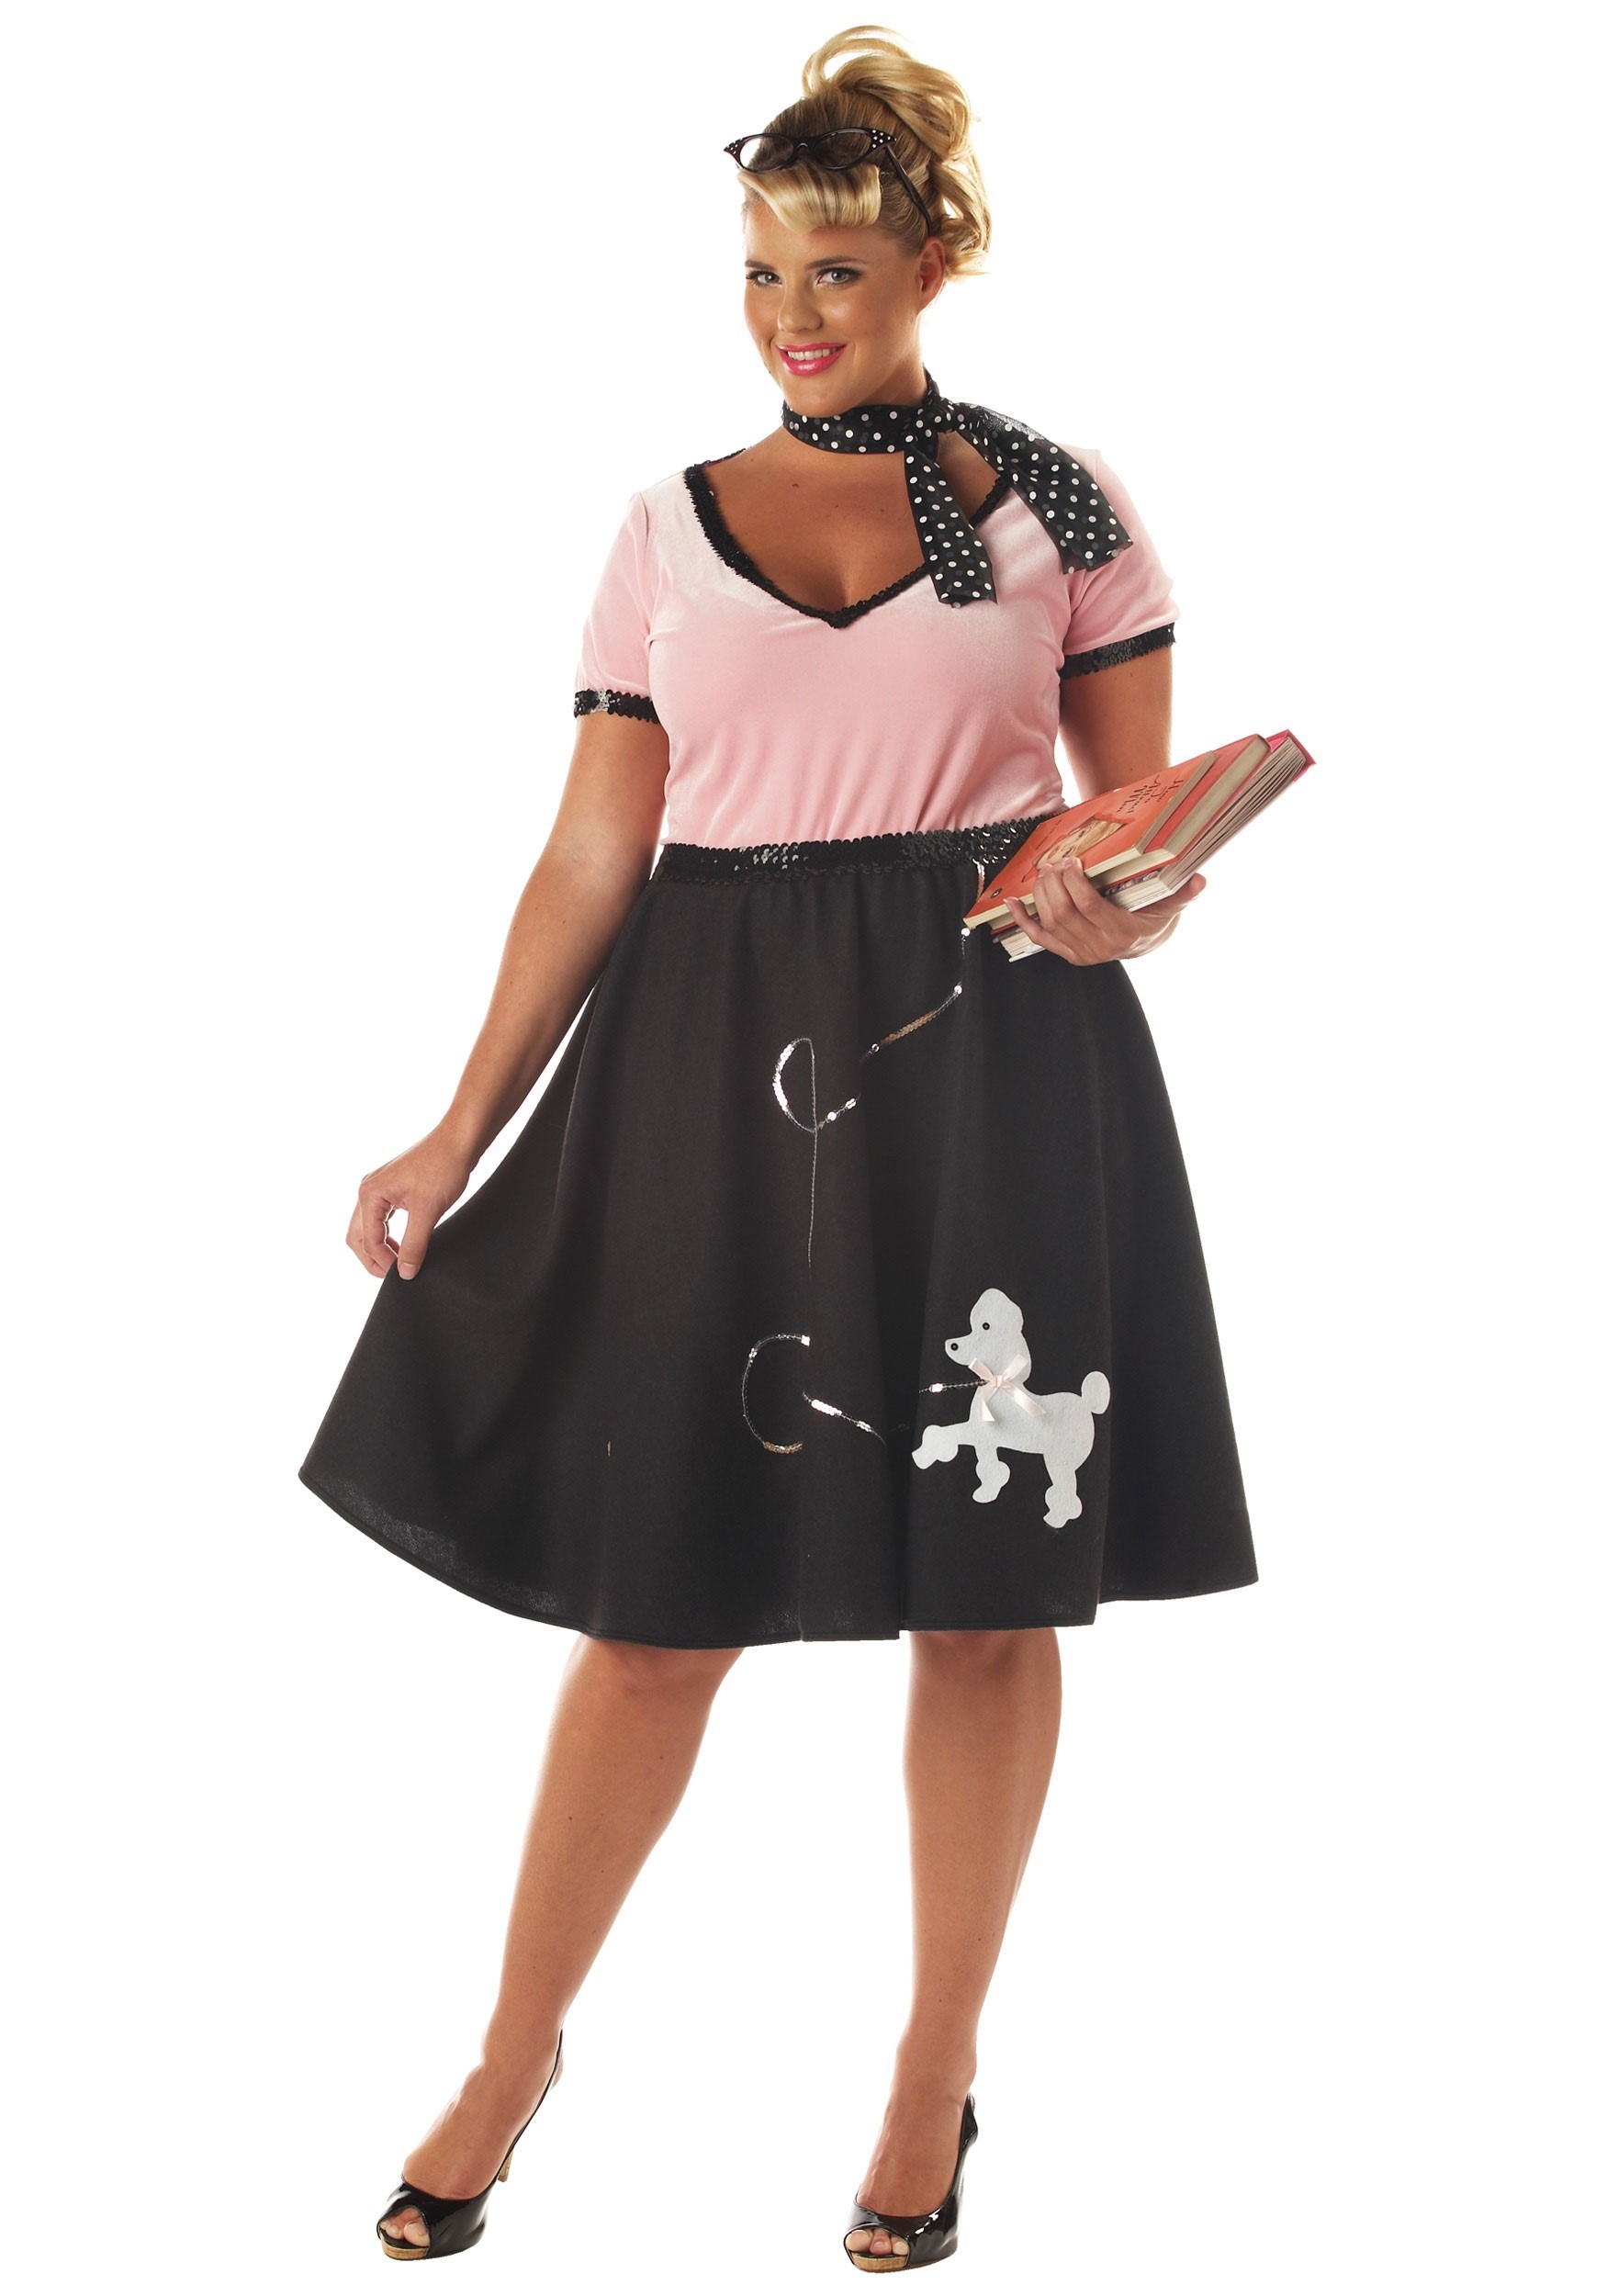 50s Sweetheart Plus Size Costume for Women